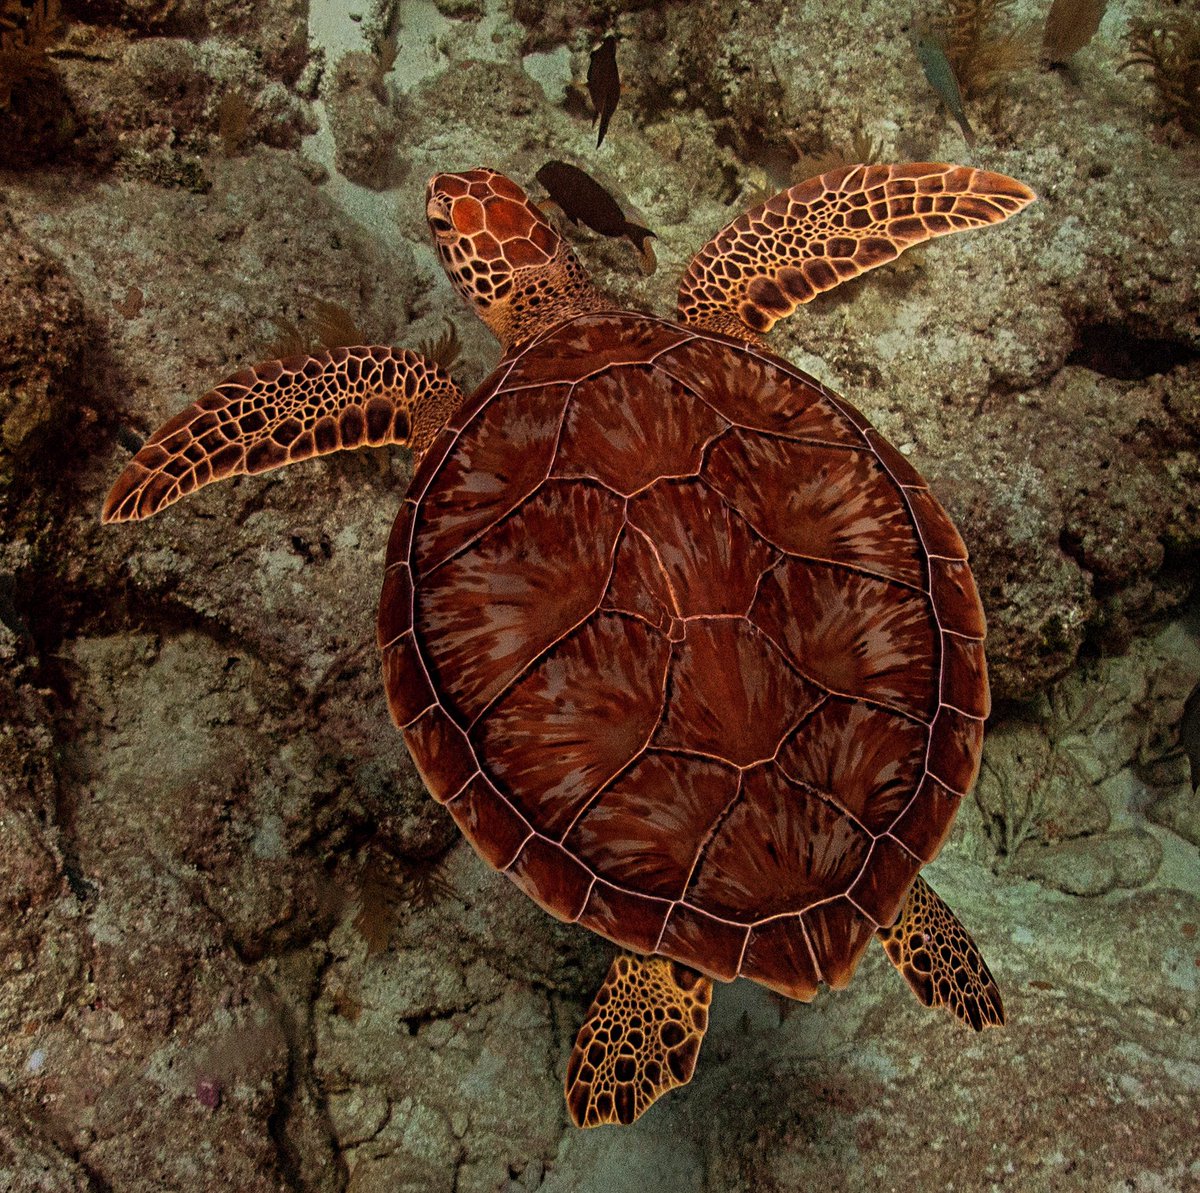 Because it’s Turtle Tuesday #scubadiving #seaturtleconservation